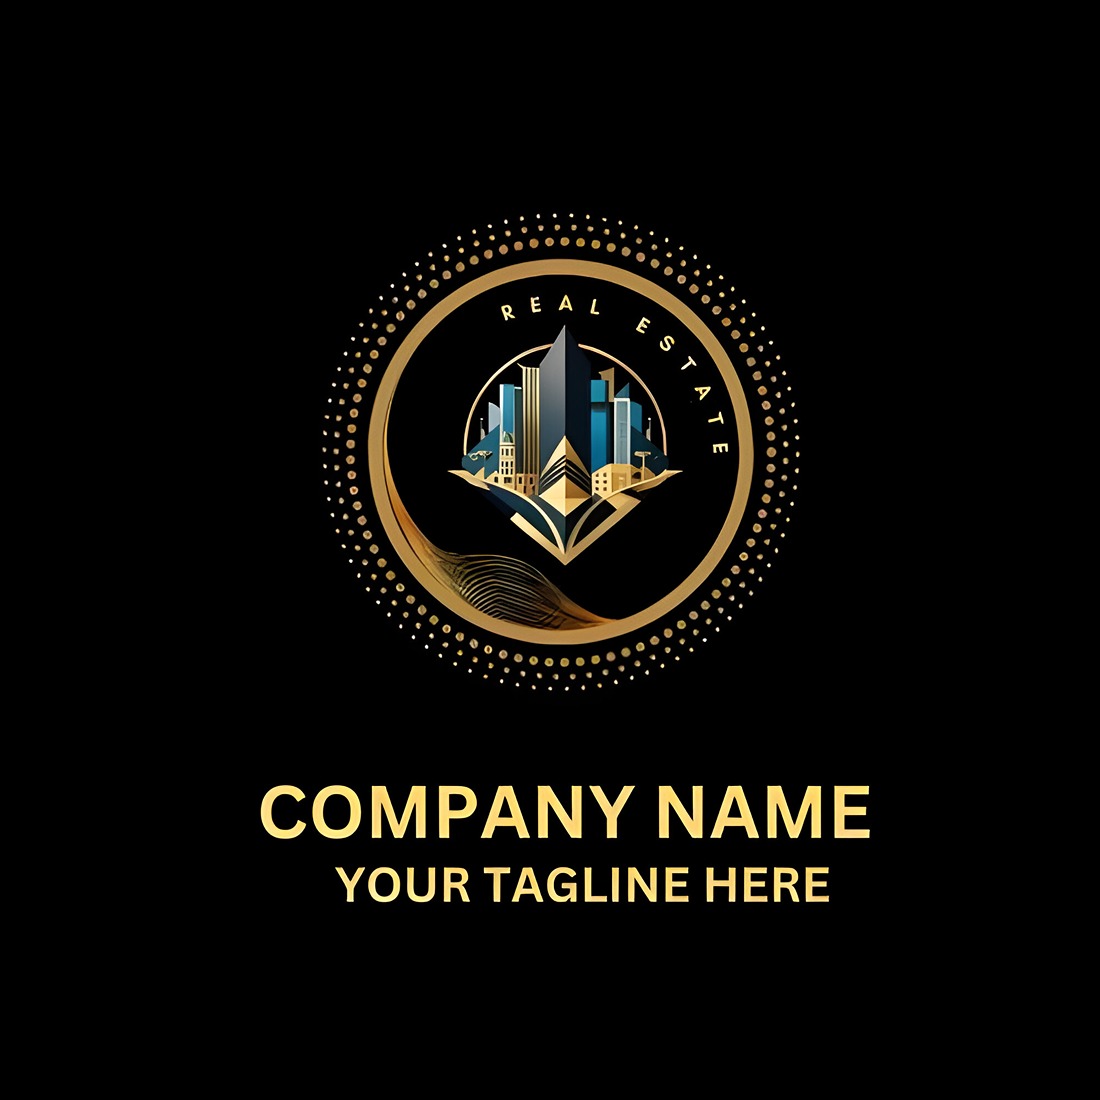 Real Estate - Luxury Logo Design Template, #realestate #logo #real #estate #realestateagent #realestateinvesting #realestatelife #luxuryrealestate #realestateteam #realestatephotographer #realestatedevelopment #realestatestyle #realestatelifestyle #realestateinnigeria #realestatenz #realestatestats #realestatepanama #realestatedevelopers #realestatepodcast #realestateagentsofinstagram #realestatevideography #realestatedeals #realestatephilippines  preview image.